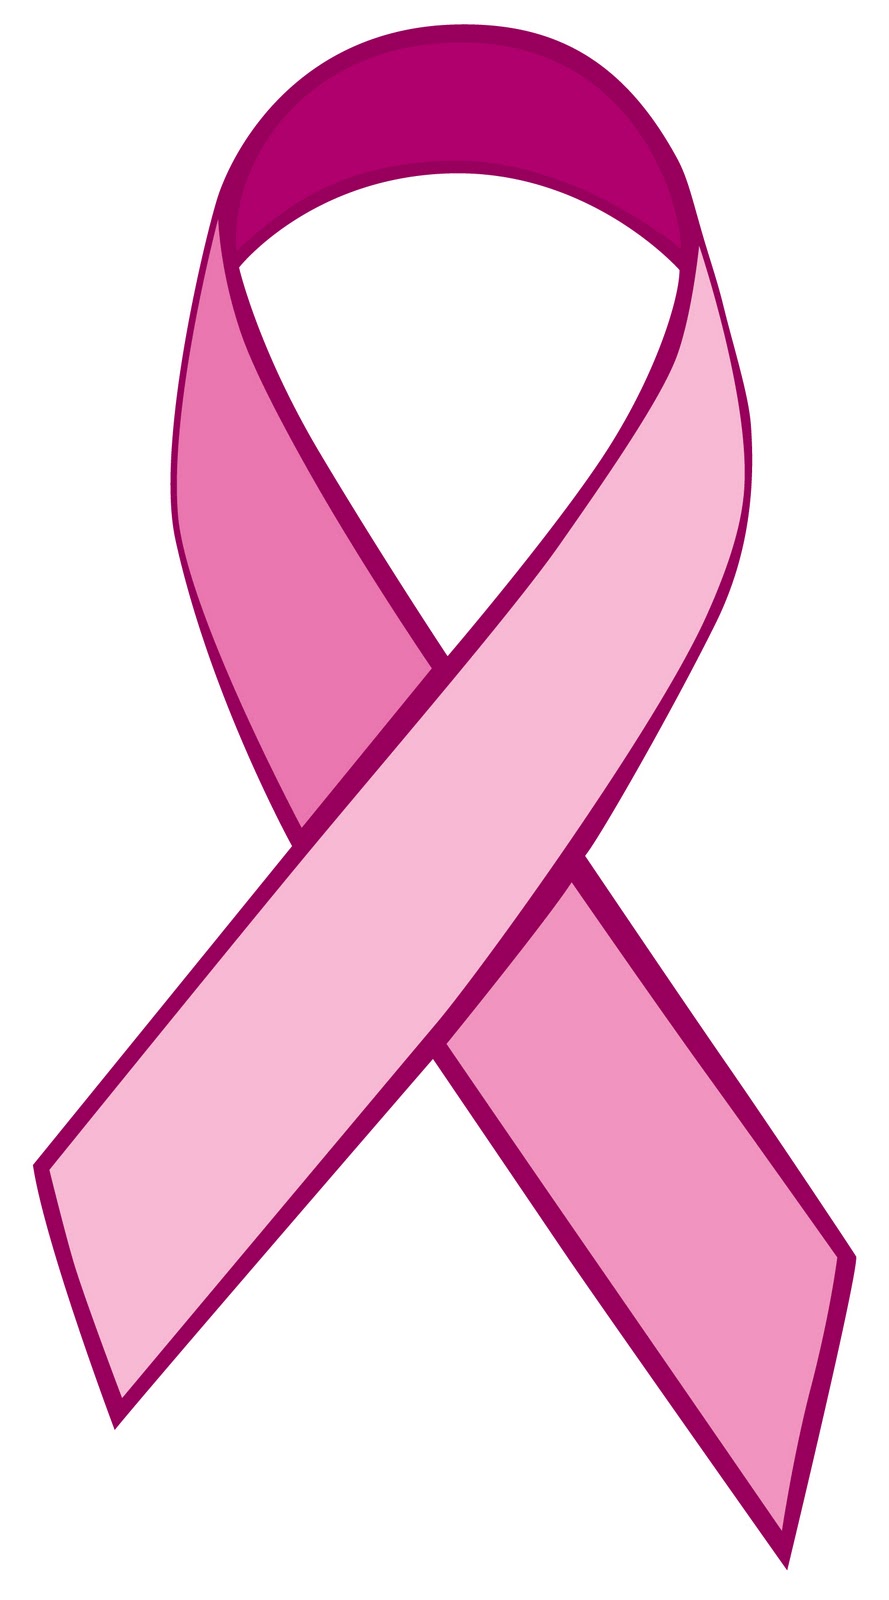 Breast Cancer Ribbon Clipart  - Cancer Ribbons Clip Art